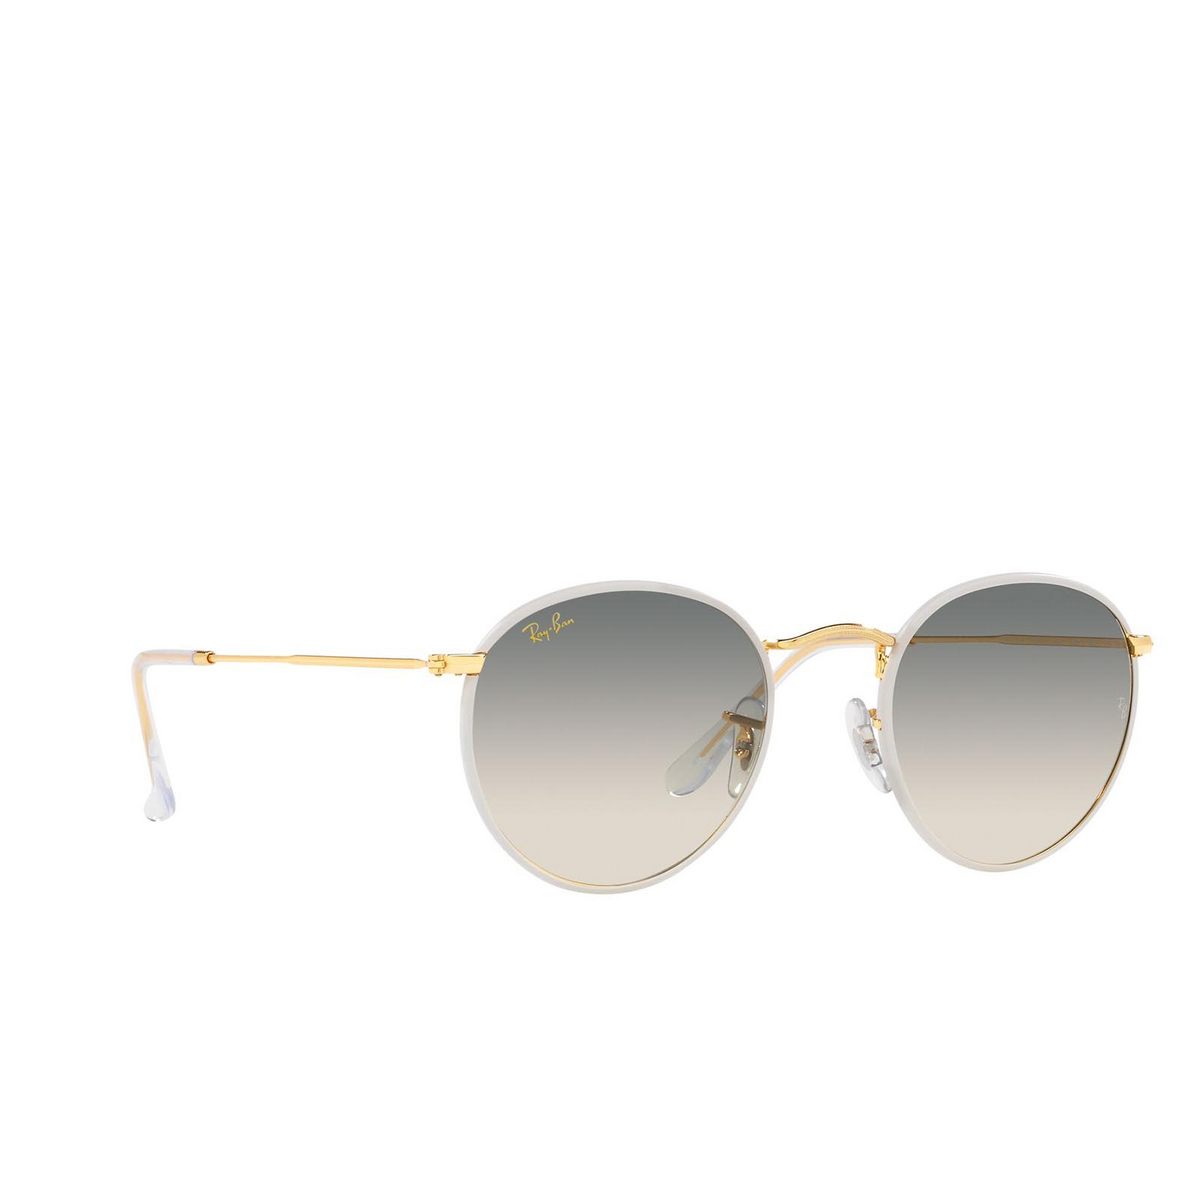 Ray-Ban ROUND FULL COLOR Sunglasses 919632 Grey on Legend Gold - three-quarters view